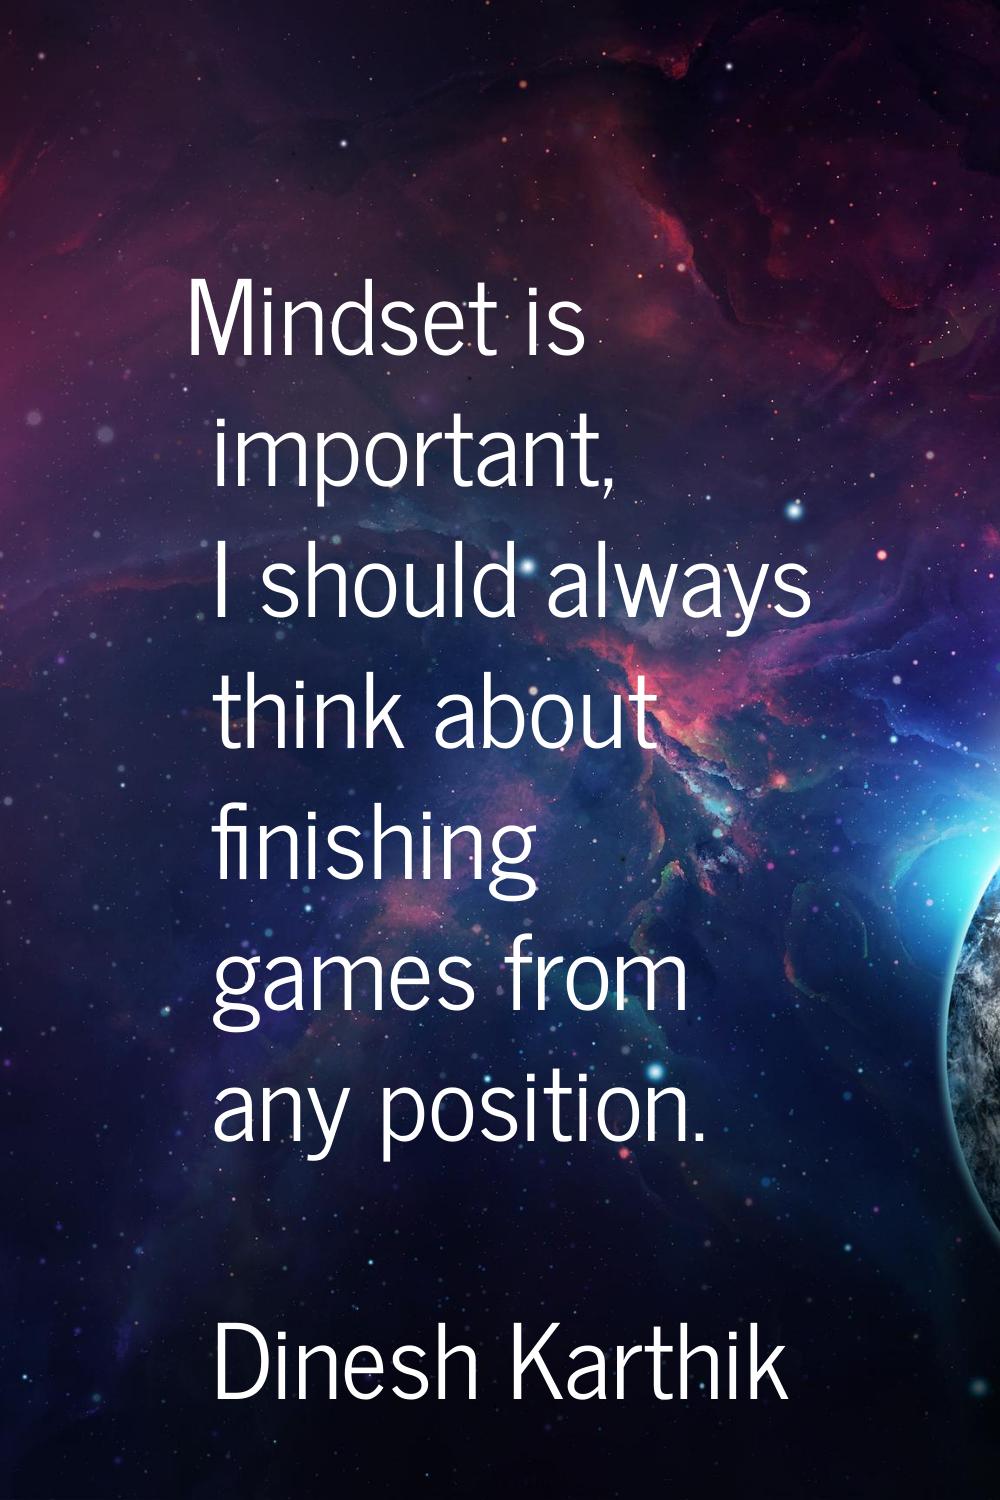 Mindset is important, I should always think about finishing games from any position.